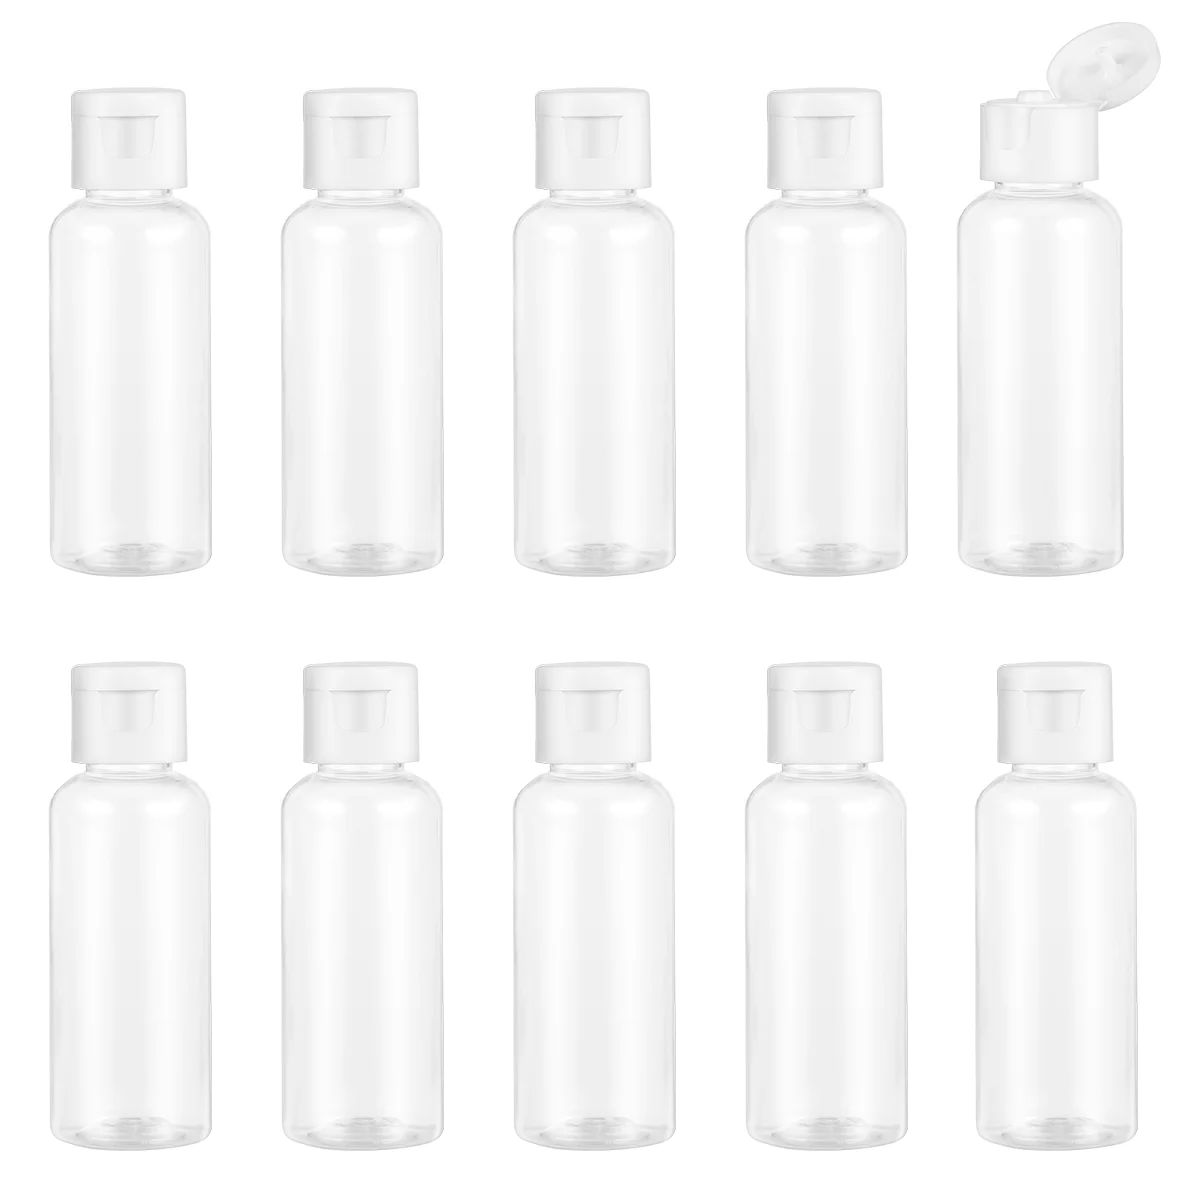 Plastic Travel Flask Refillable Travel Bottle Liquid Cosmetics Containers Shampoo Cream For Travel the 6th generation 5000ppb spe pem high hydrogen concentration hydrogen rich water bottle generator flask ionizer maker h2 cup